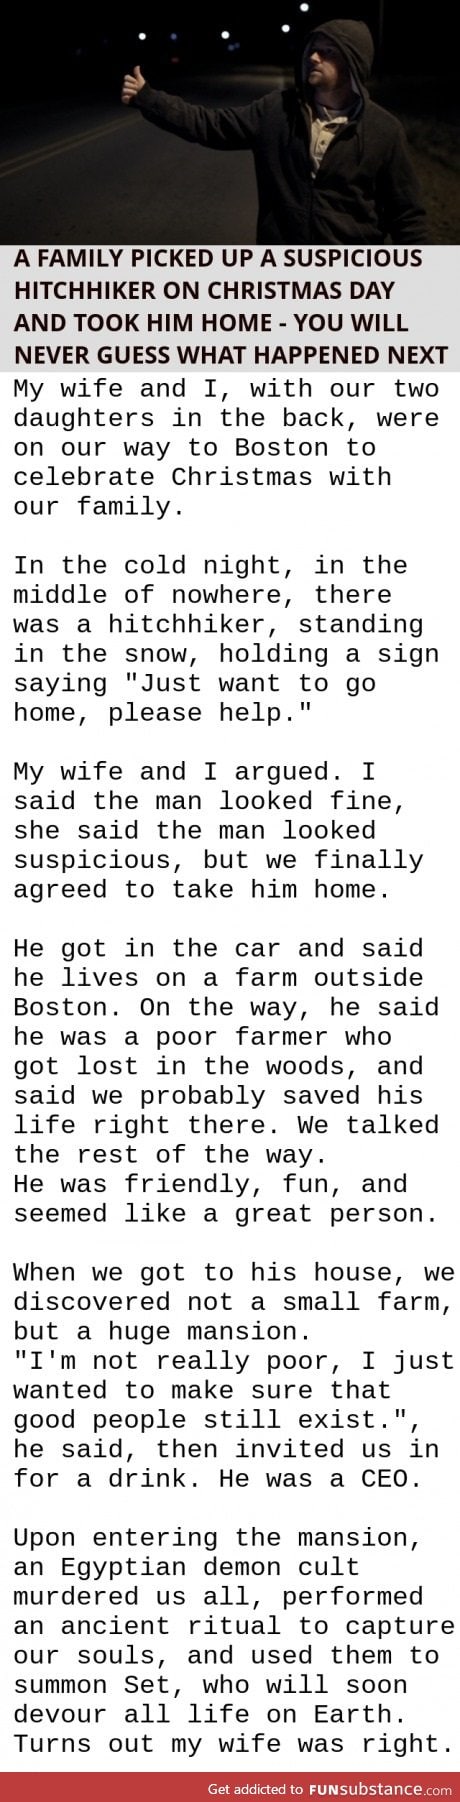 Faith in Humanity Restored -short read and worth it, really